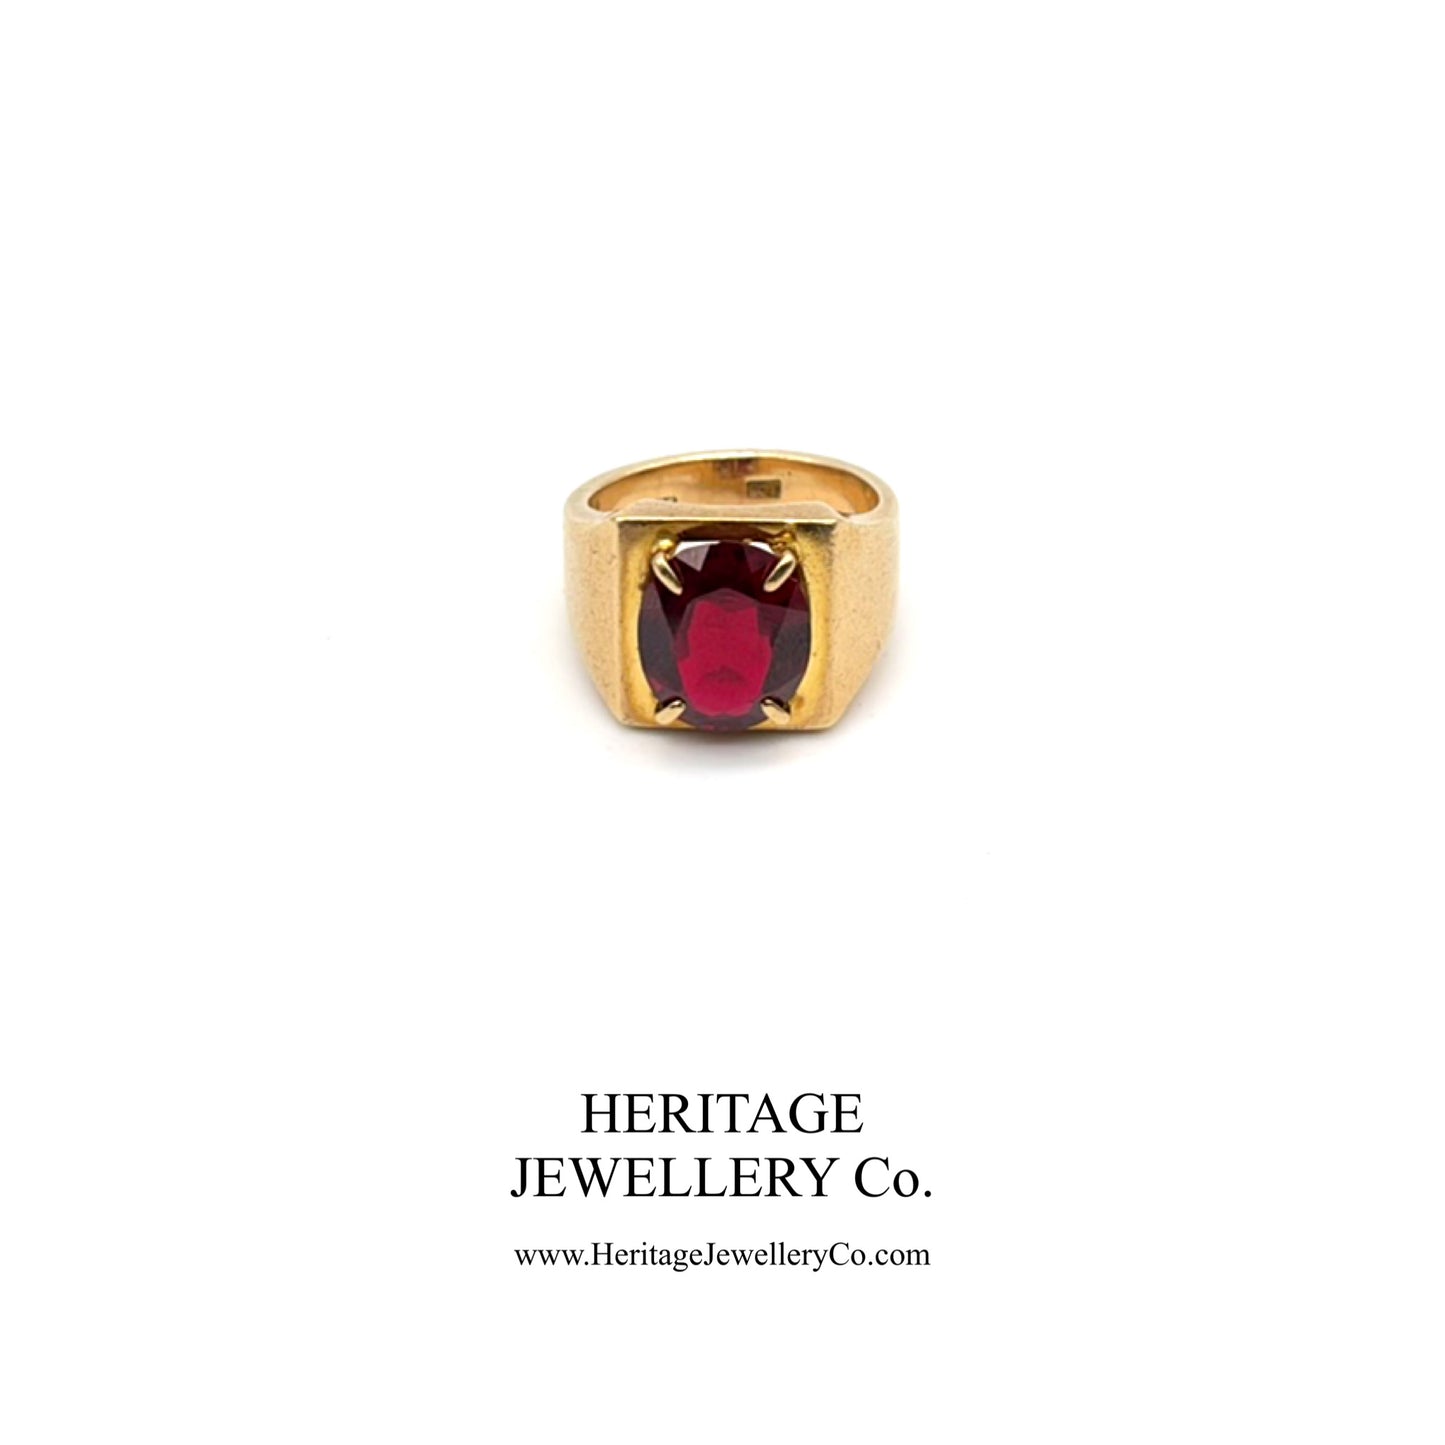 Antique Period Signet Ring with Fire Garnet (9ct Gold)